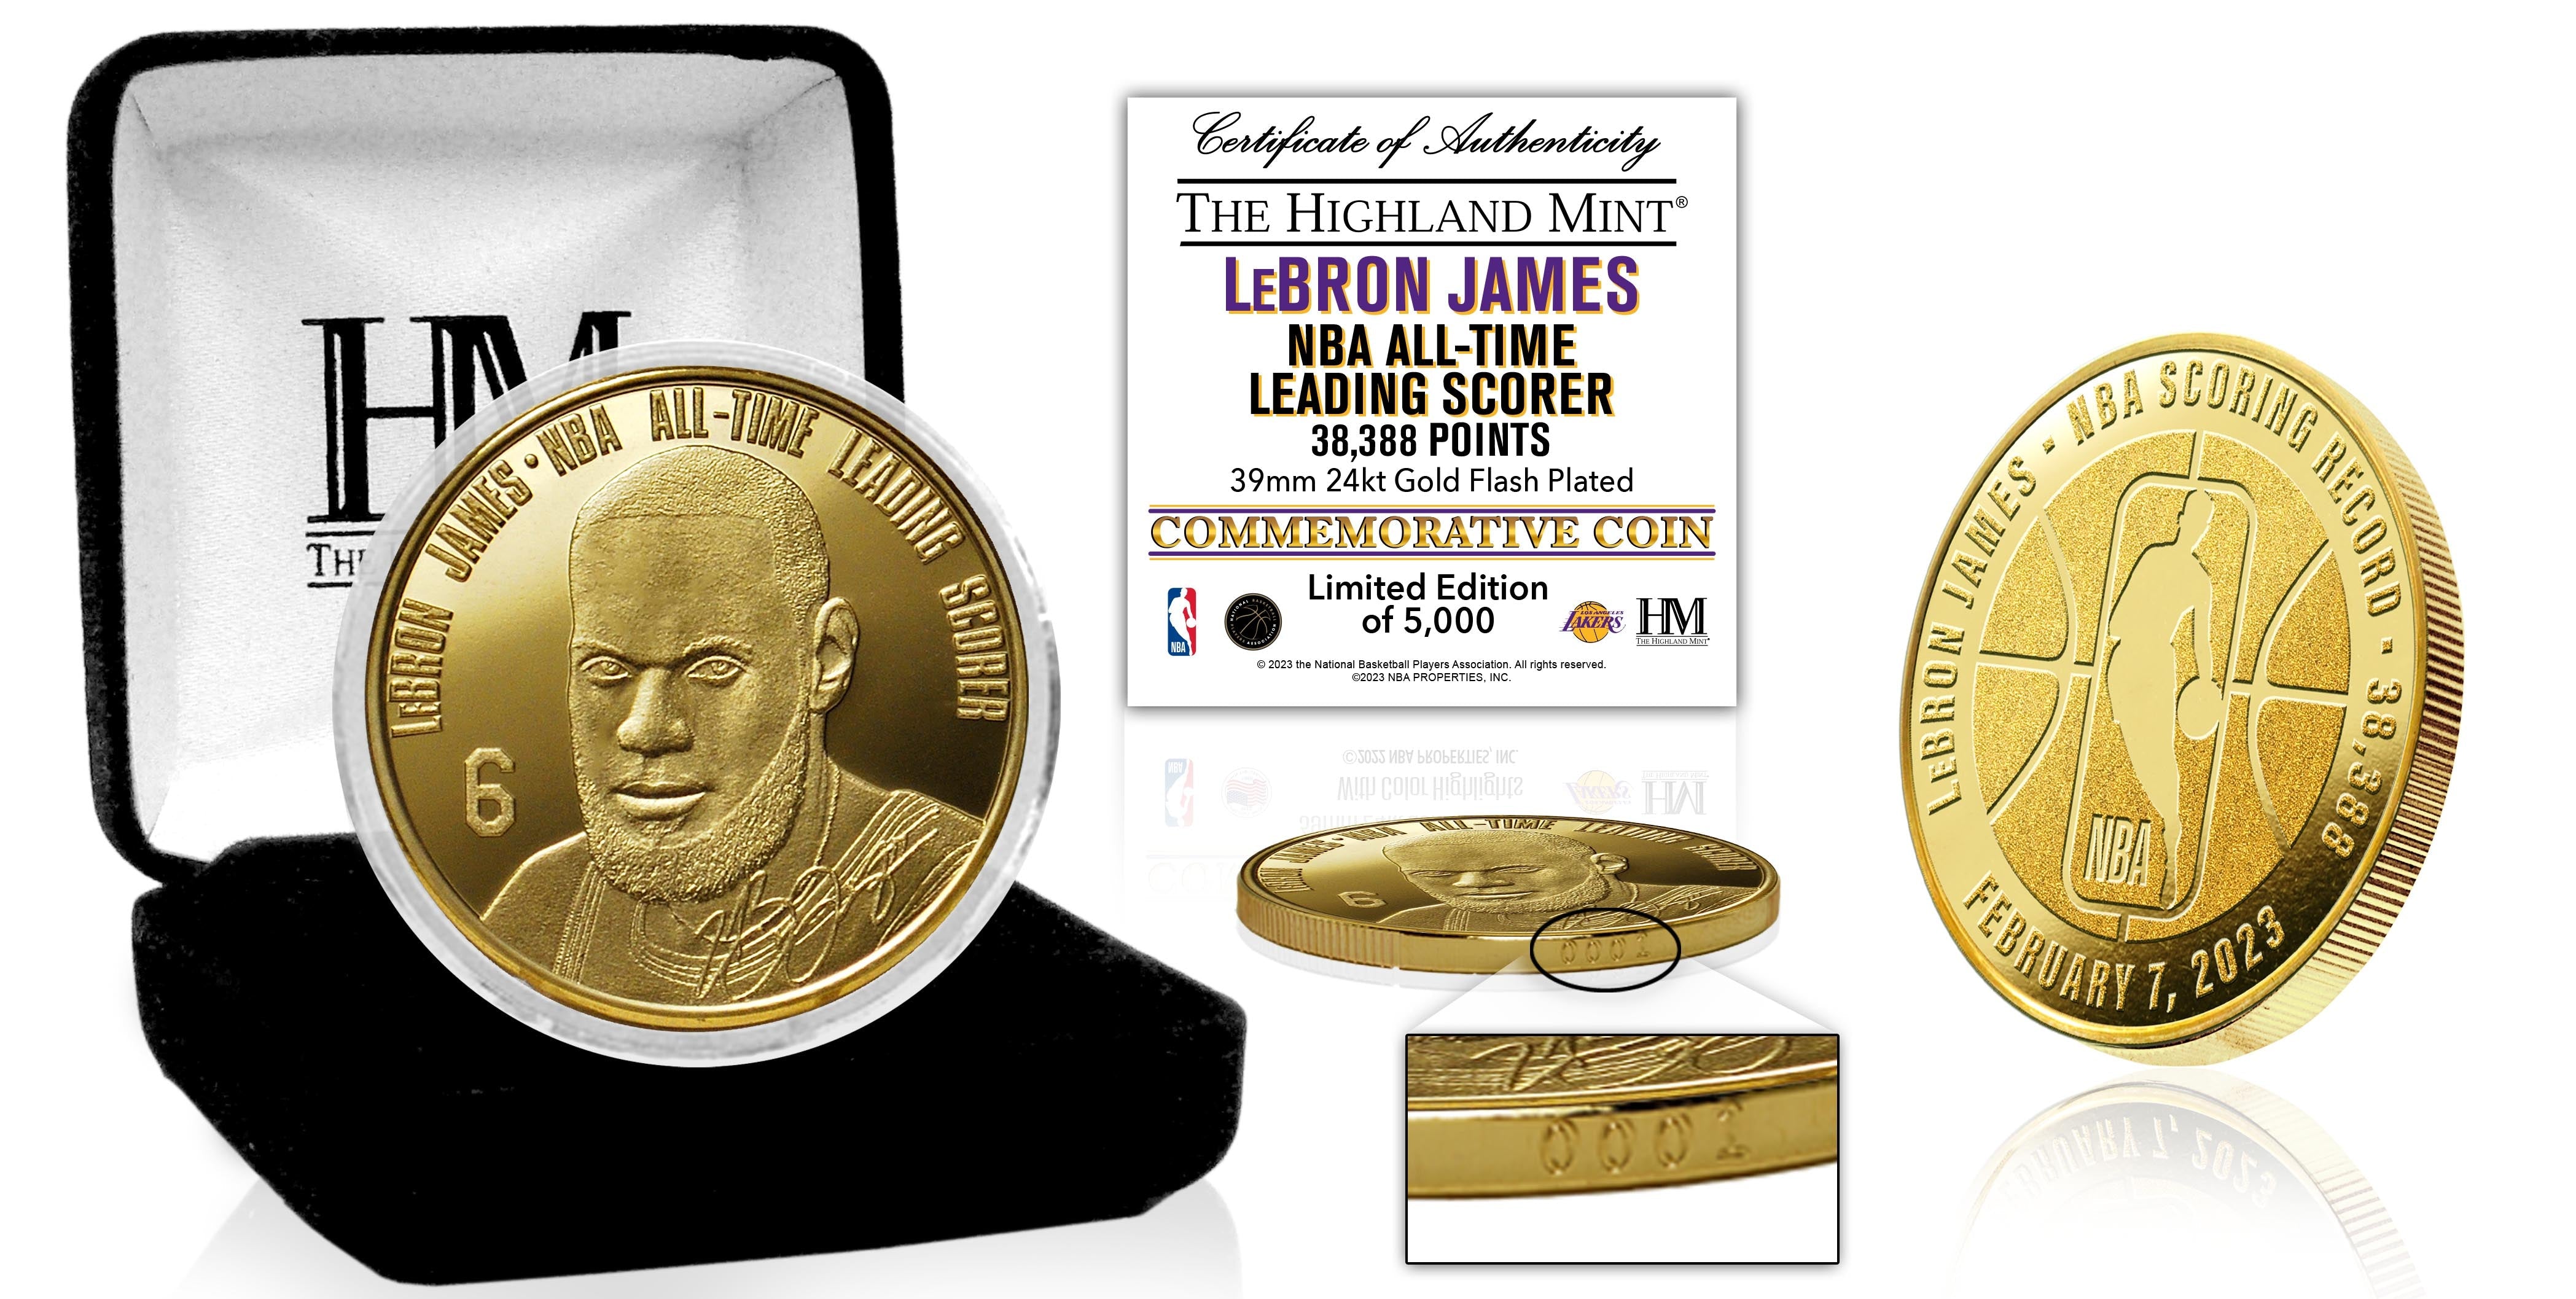 LeBron James Los Angeles Lakers NBA All-Time Leading Scorer Gold Coin